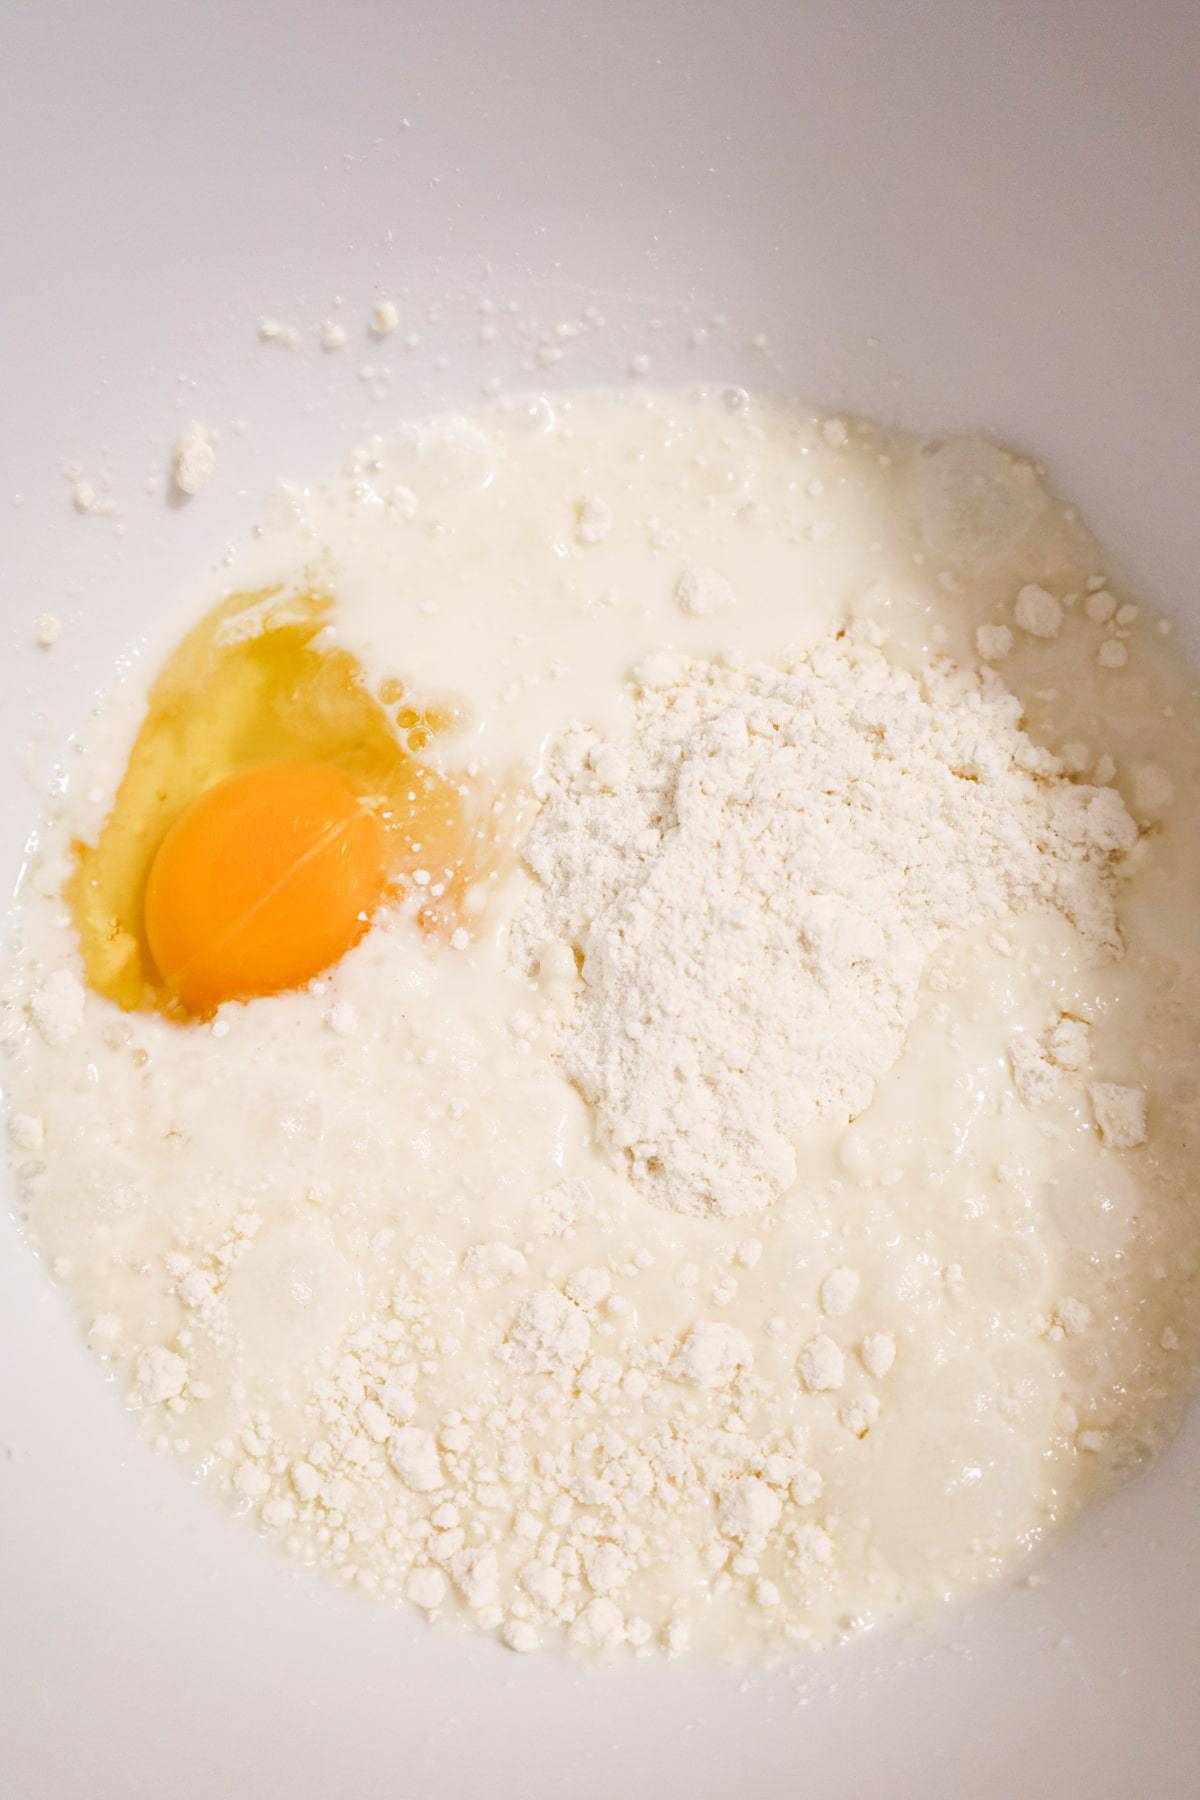 Bisquick mix, milk and an egg in a mixing bowl